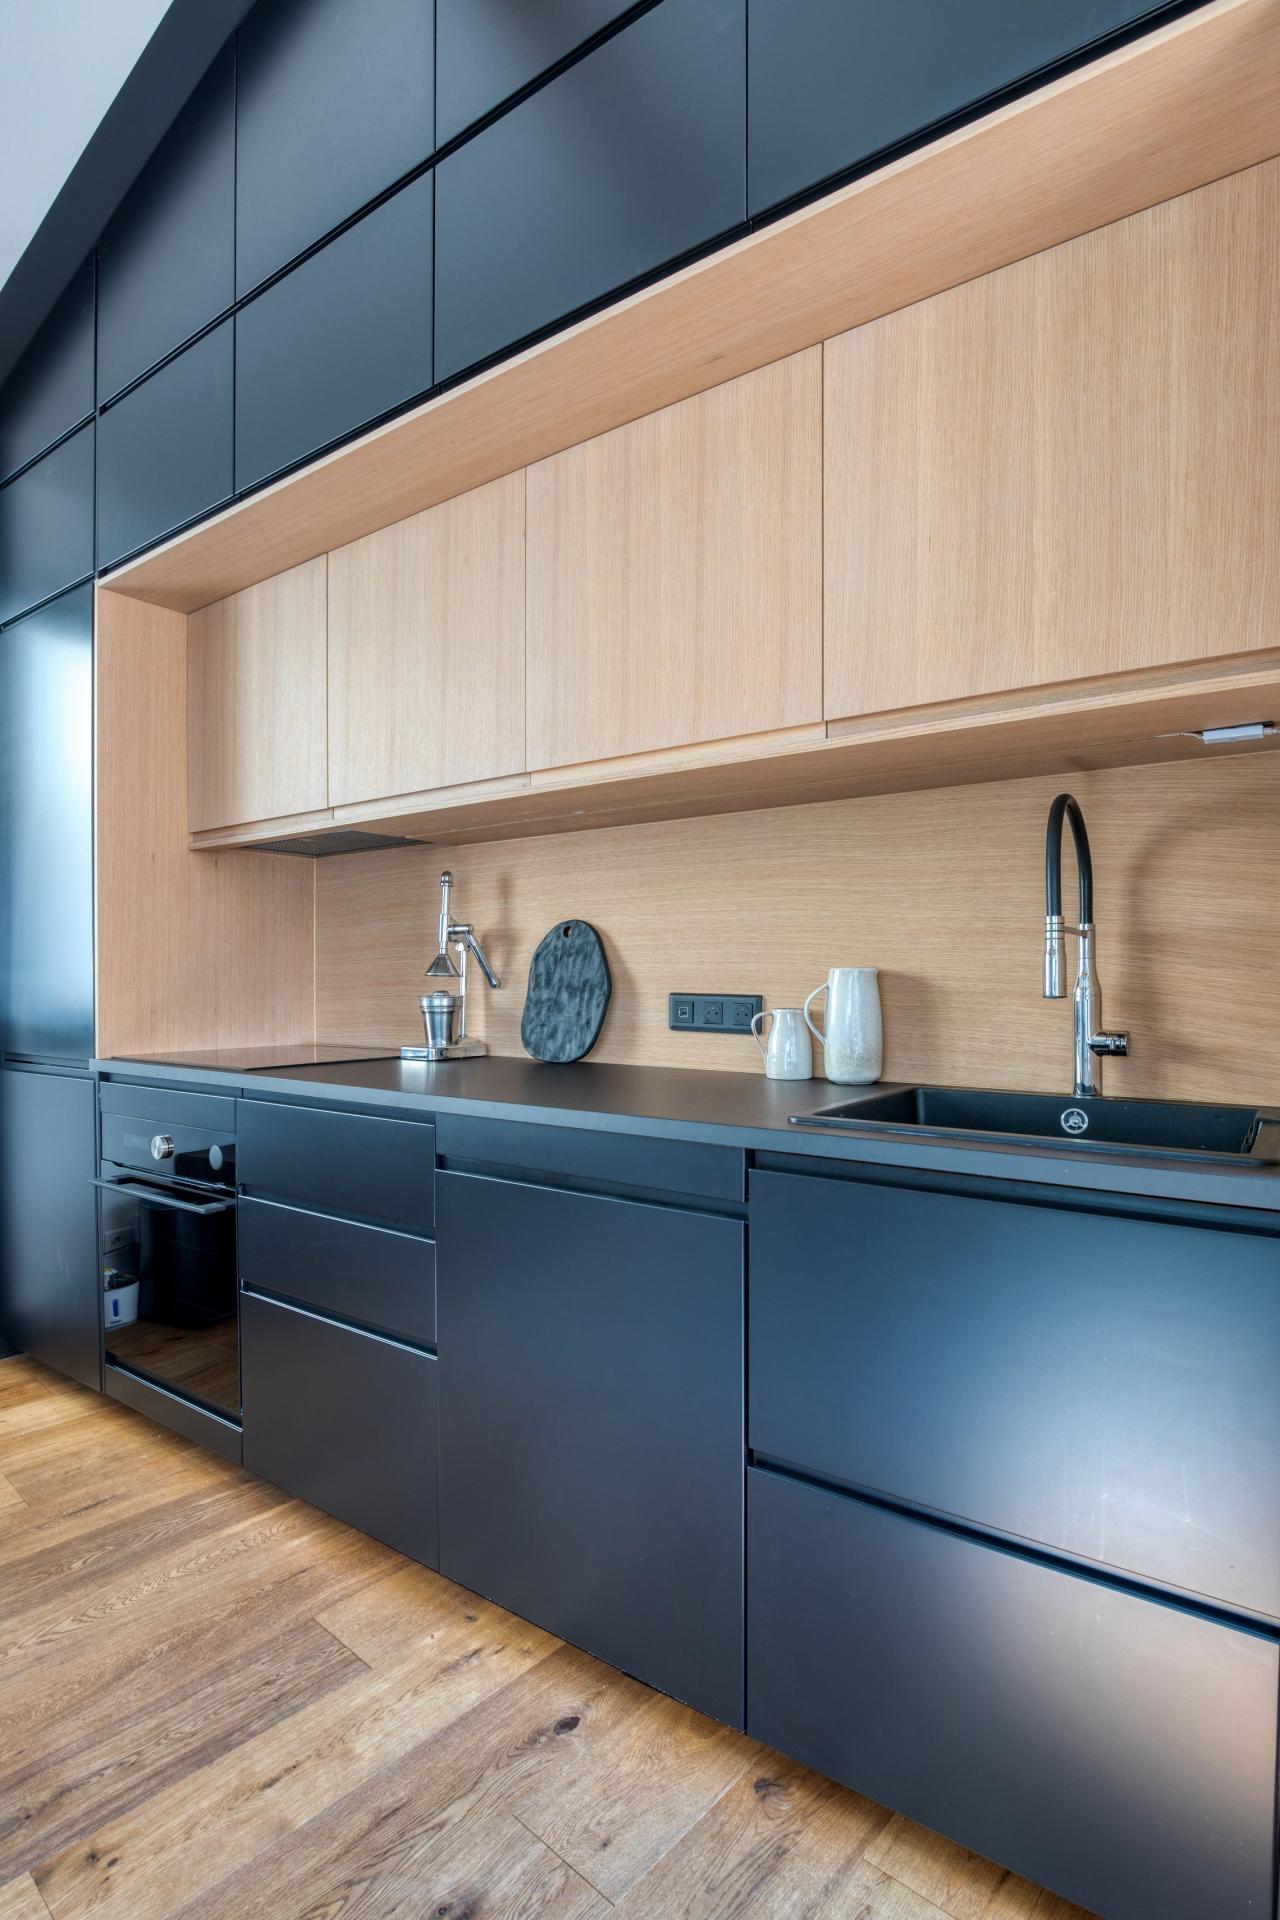 An Asphalte & Natural Oak Kitchen created by Studio Ocells - view 3/4